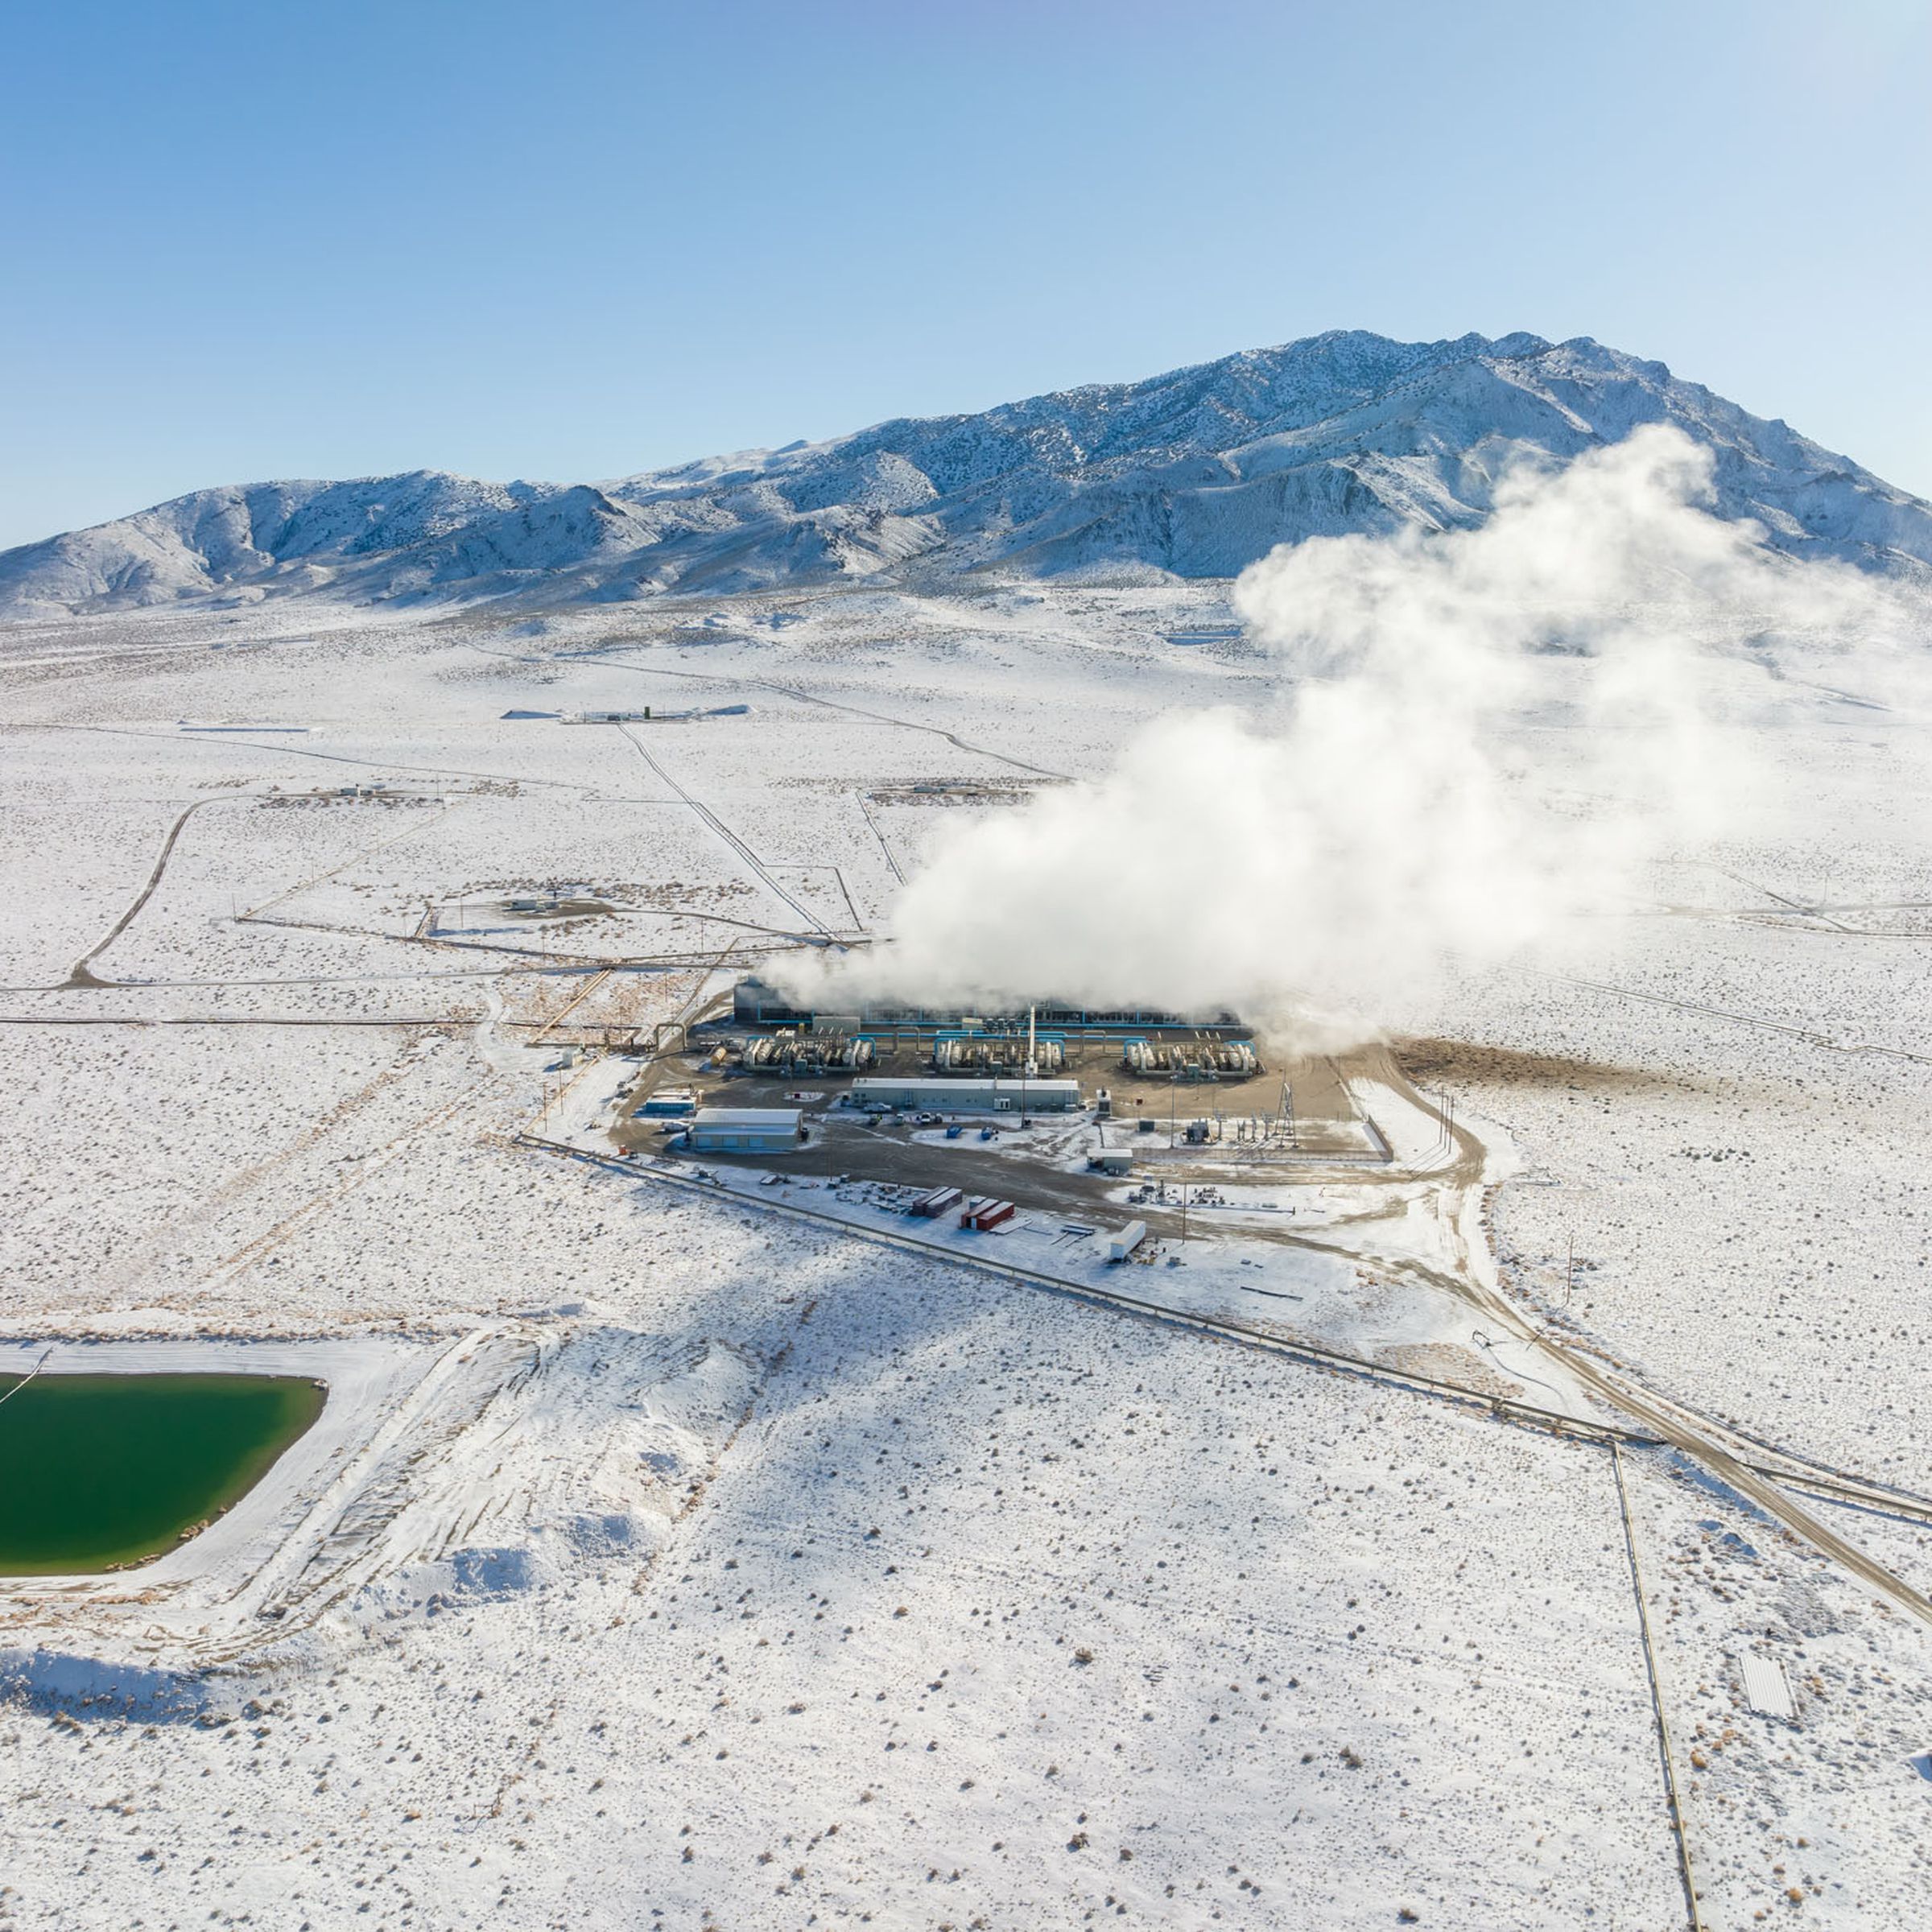 Steam rises from a geothermal power plant in the middle of a snow-covered desert.